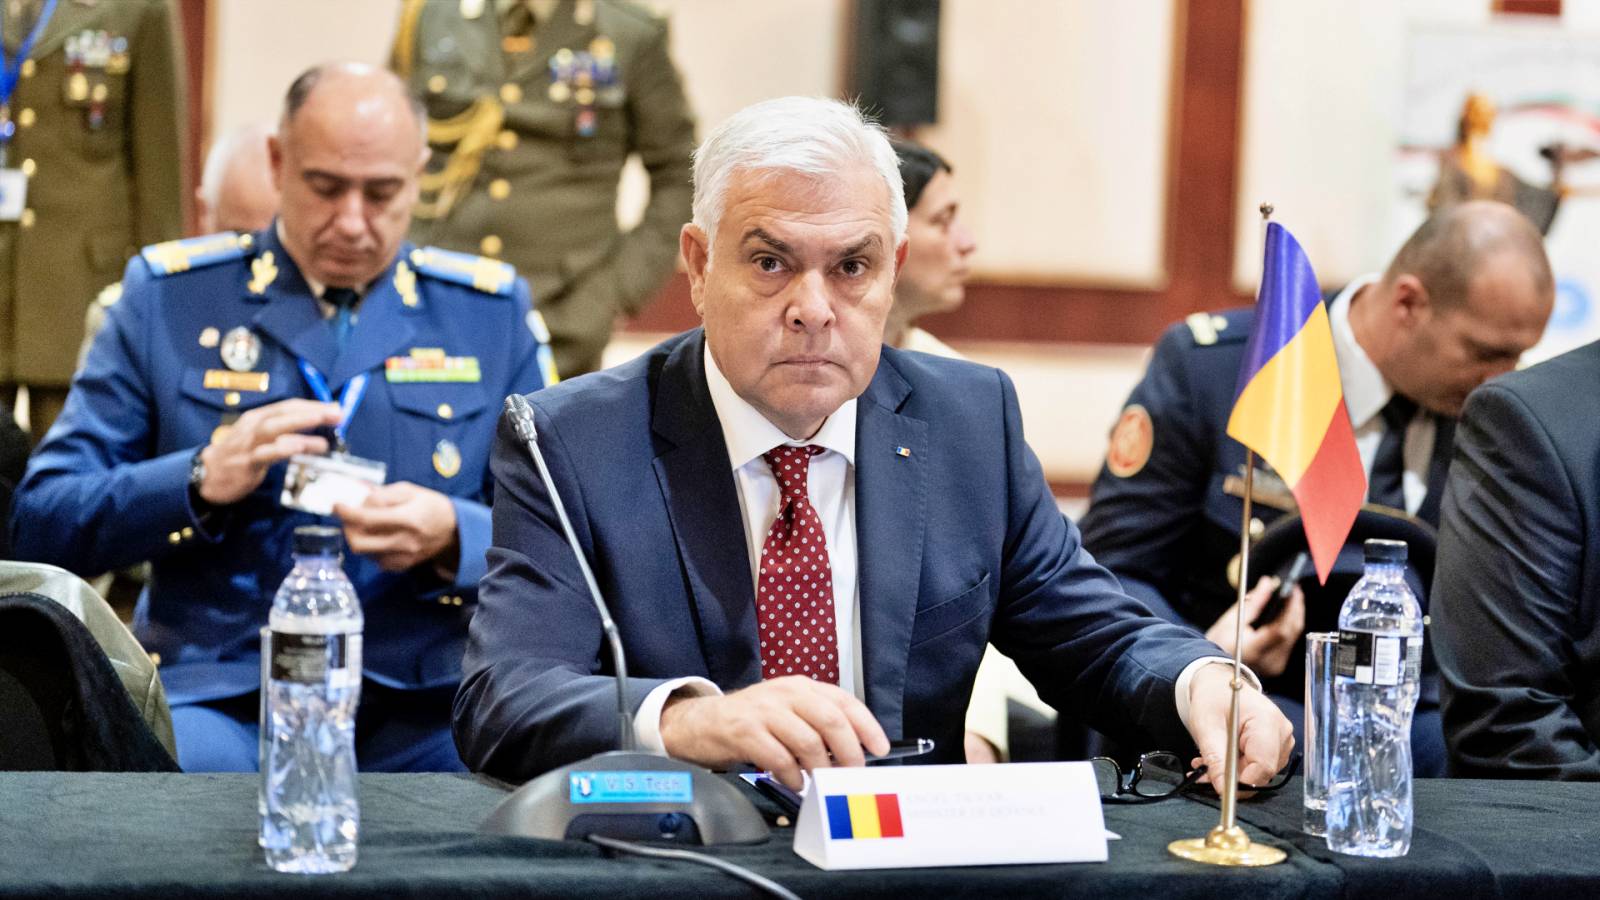 The Minister of Defense Announces Official Romanian Decisions IMPORTANT Great War